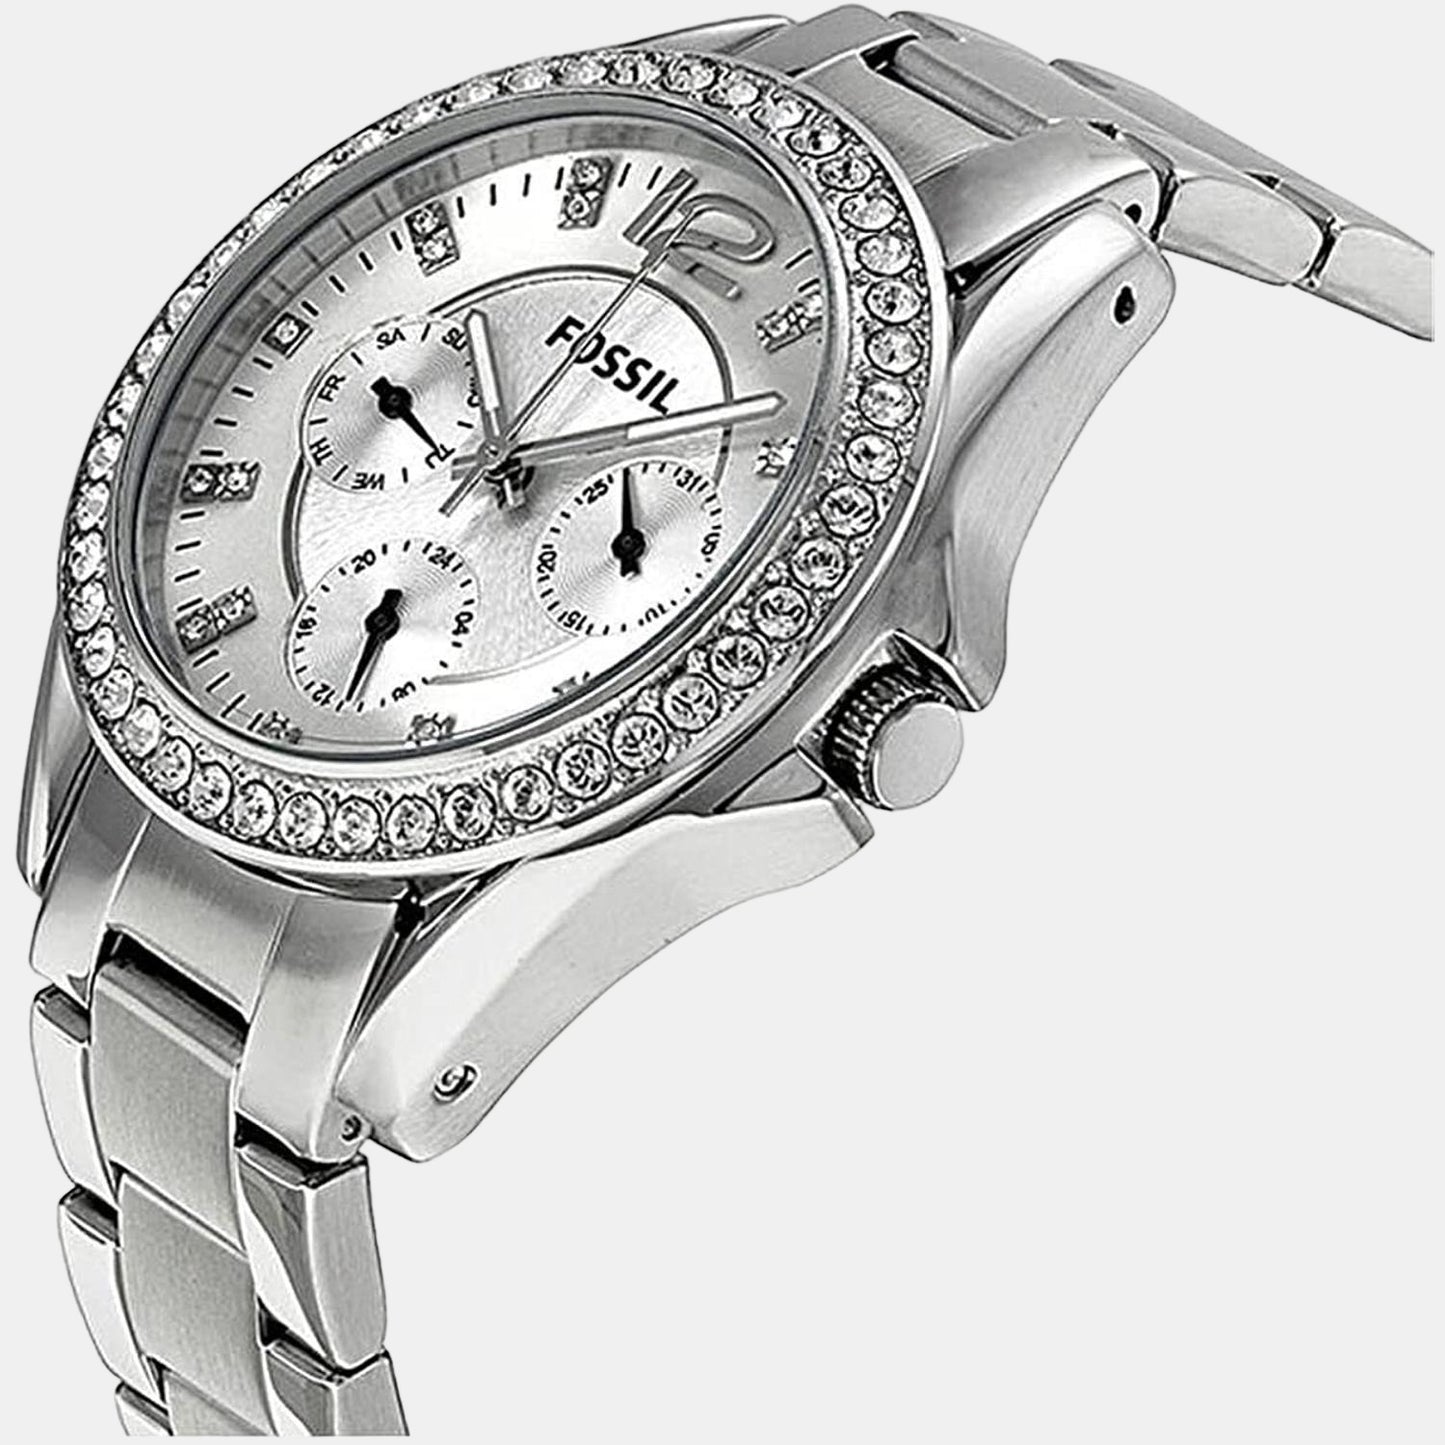 Female Silver Stainless Steel Chronograph Watch ES3202